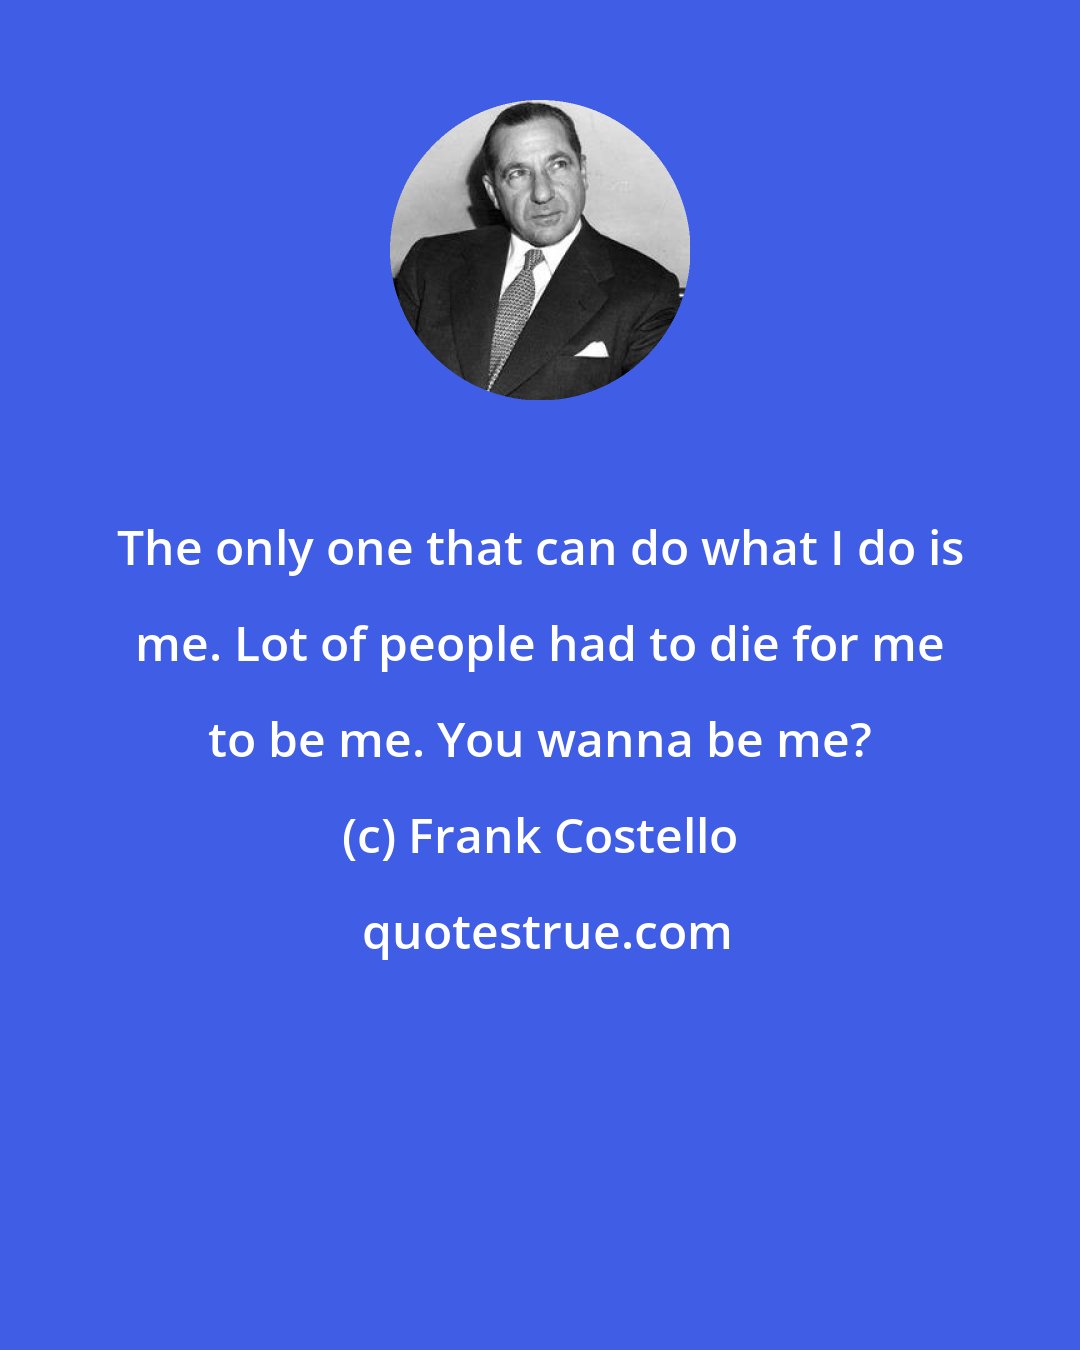 Frank Costello: The only one that can do what I do is me. Lot of people had to die for me to be me. You wanna be me?